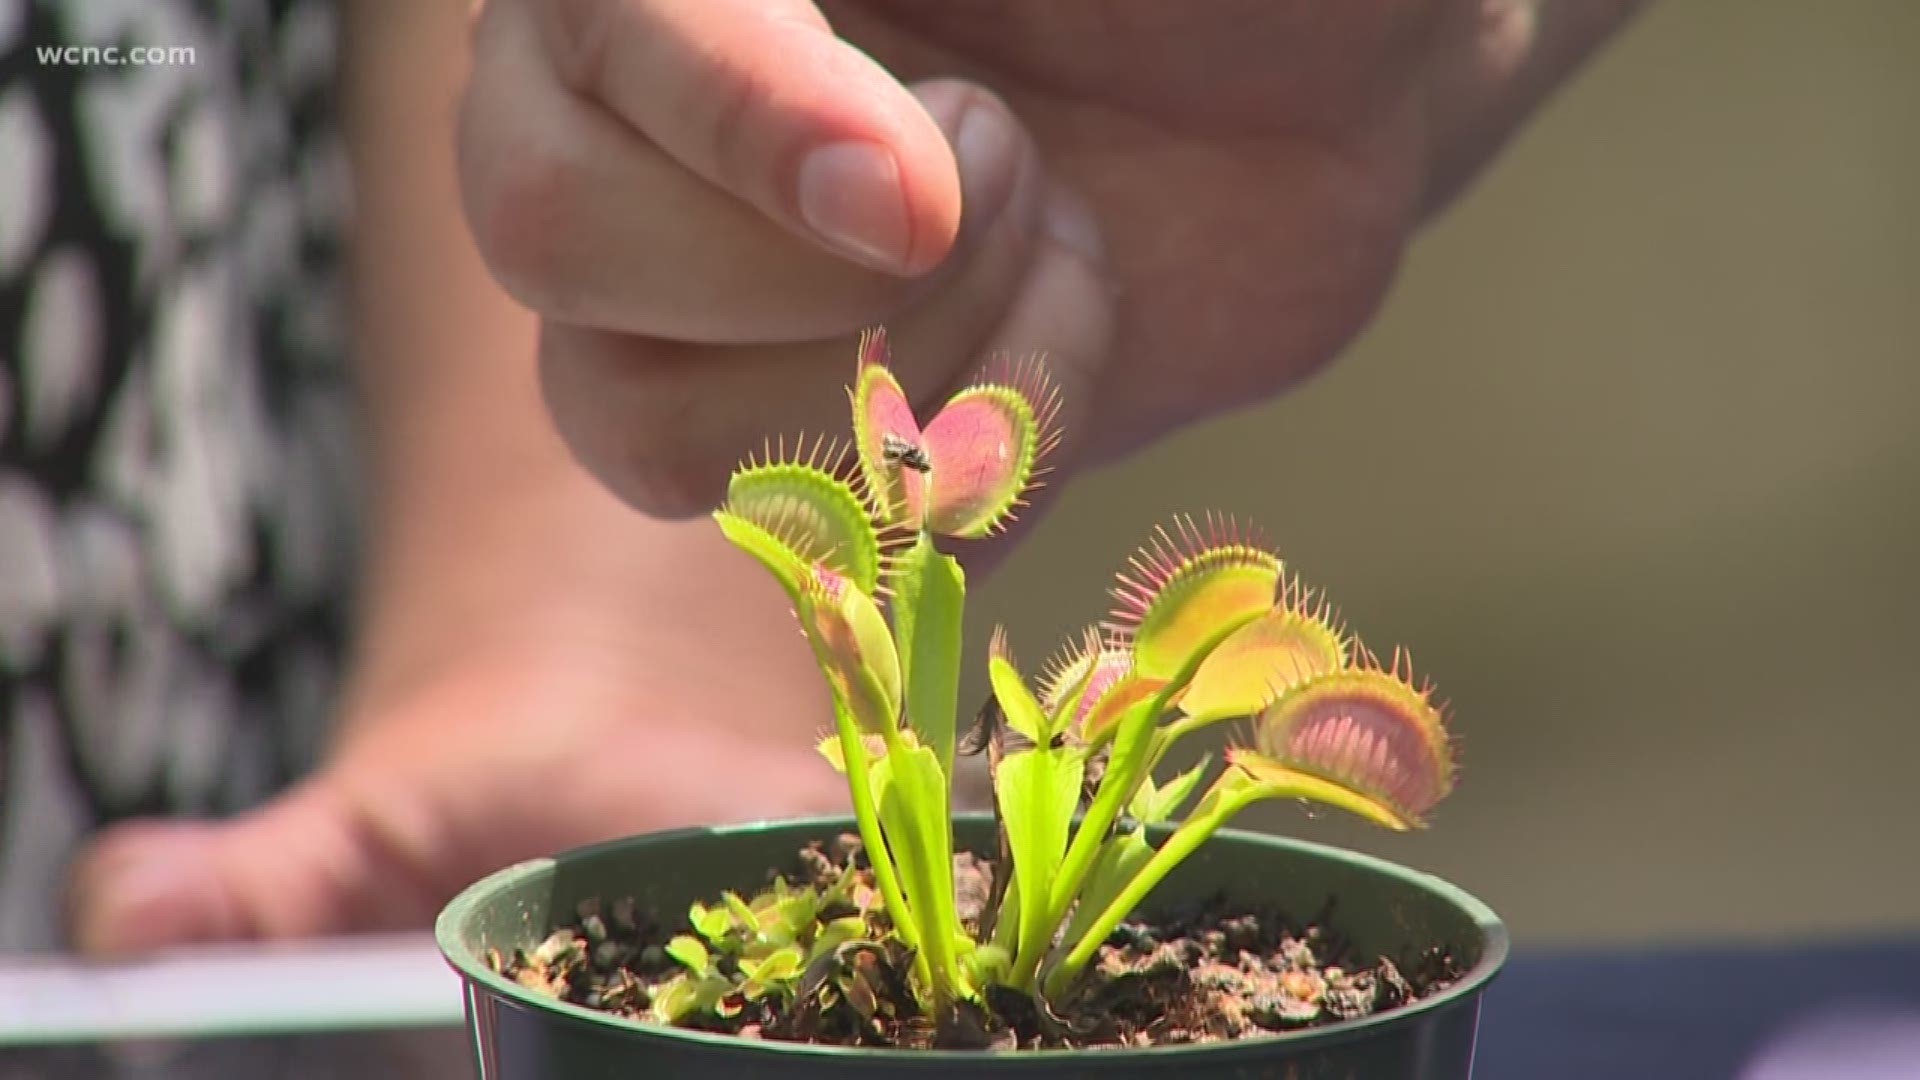 Jeff Gillman with UNCC Botanical Gardens shares what carnivorous plants are and how to care for them.